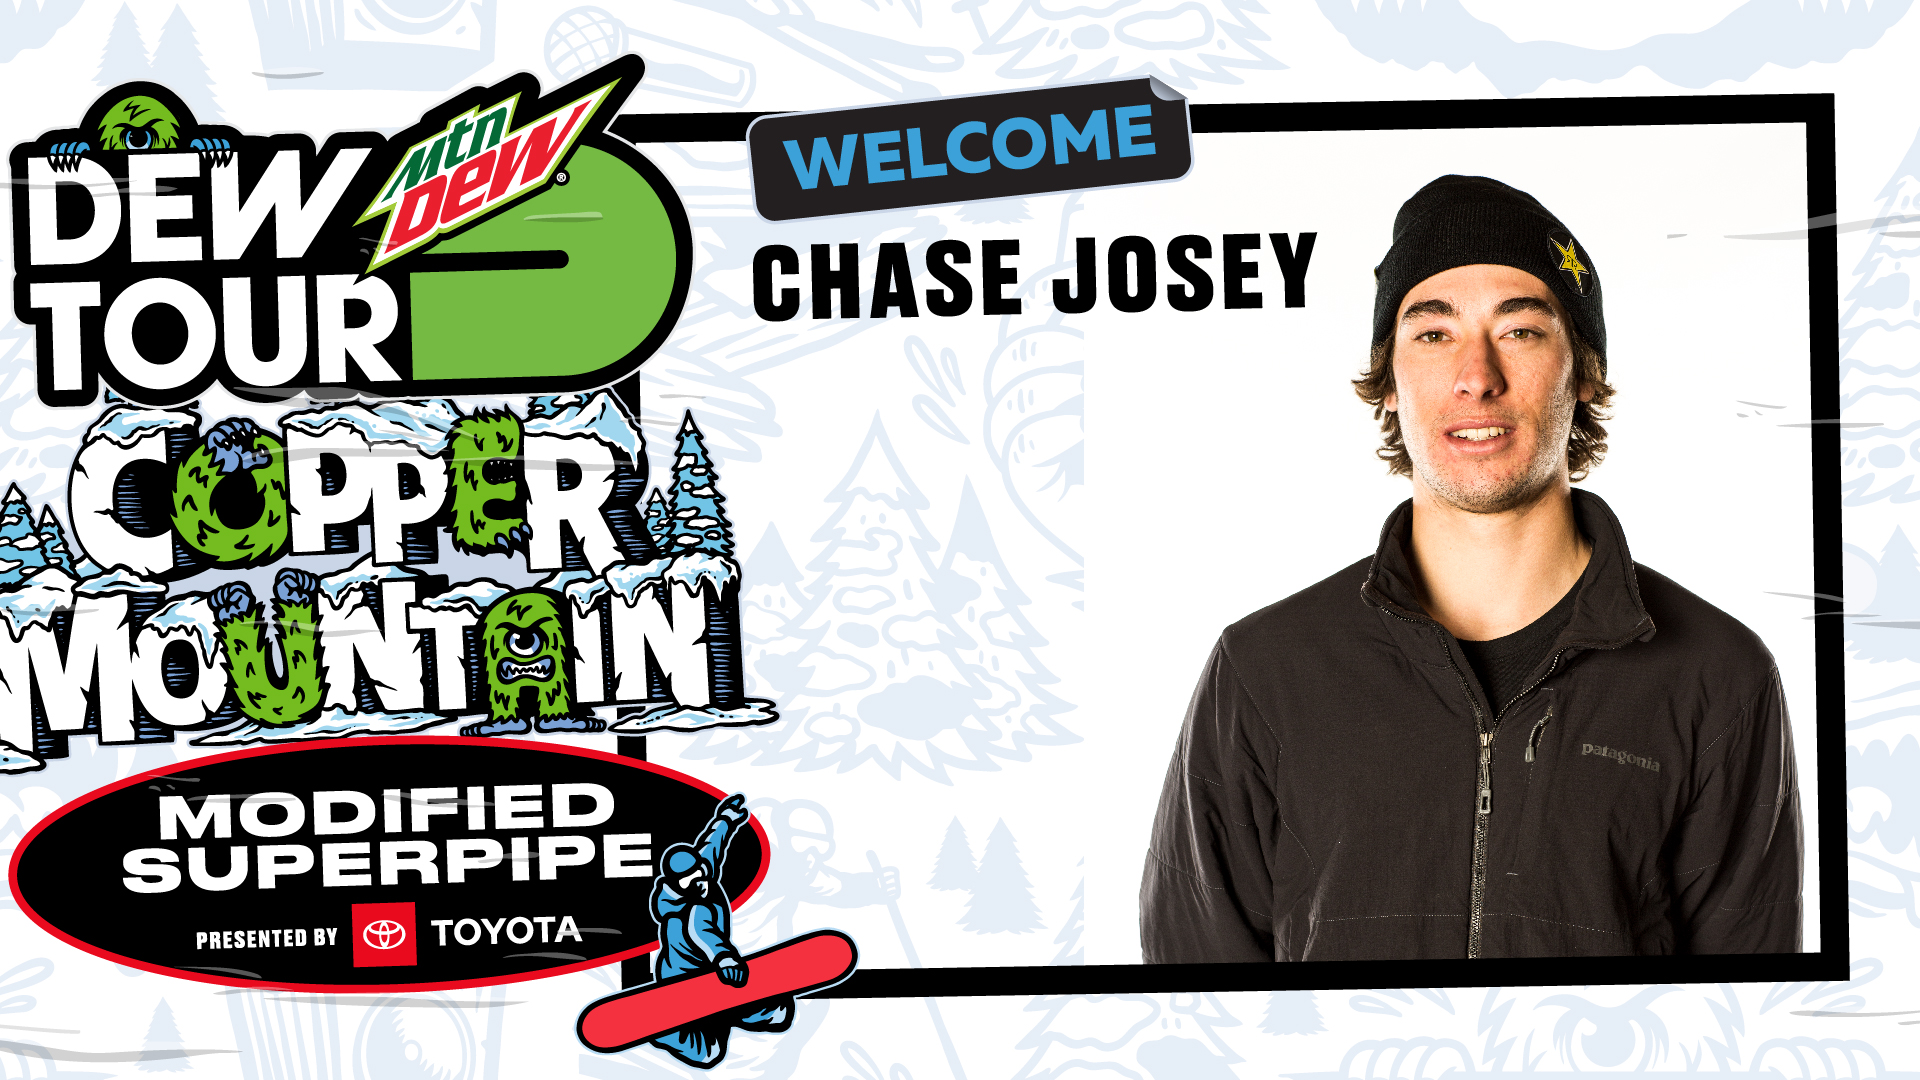 Welcome Chase Josey